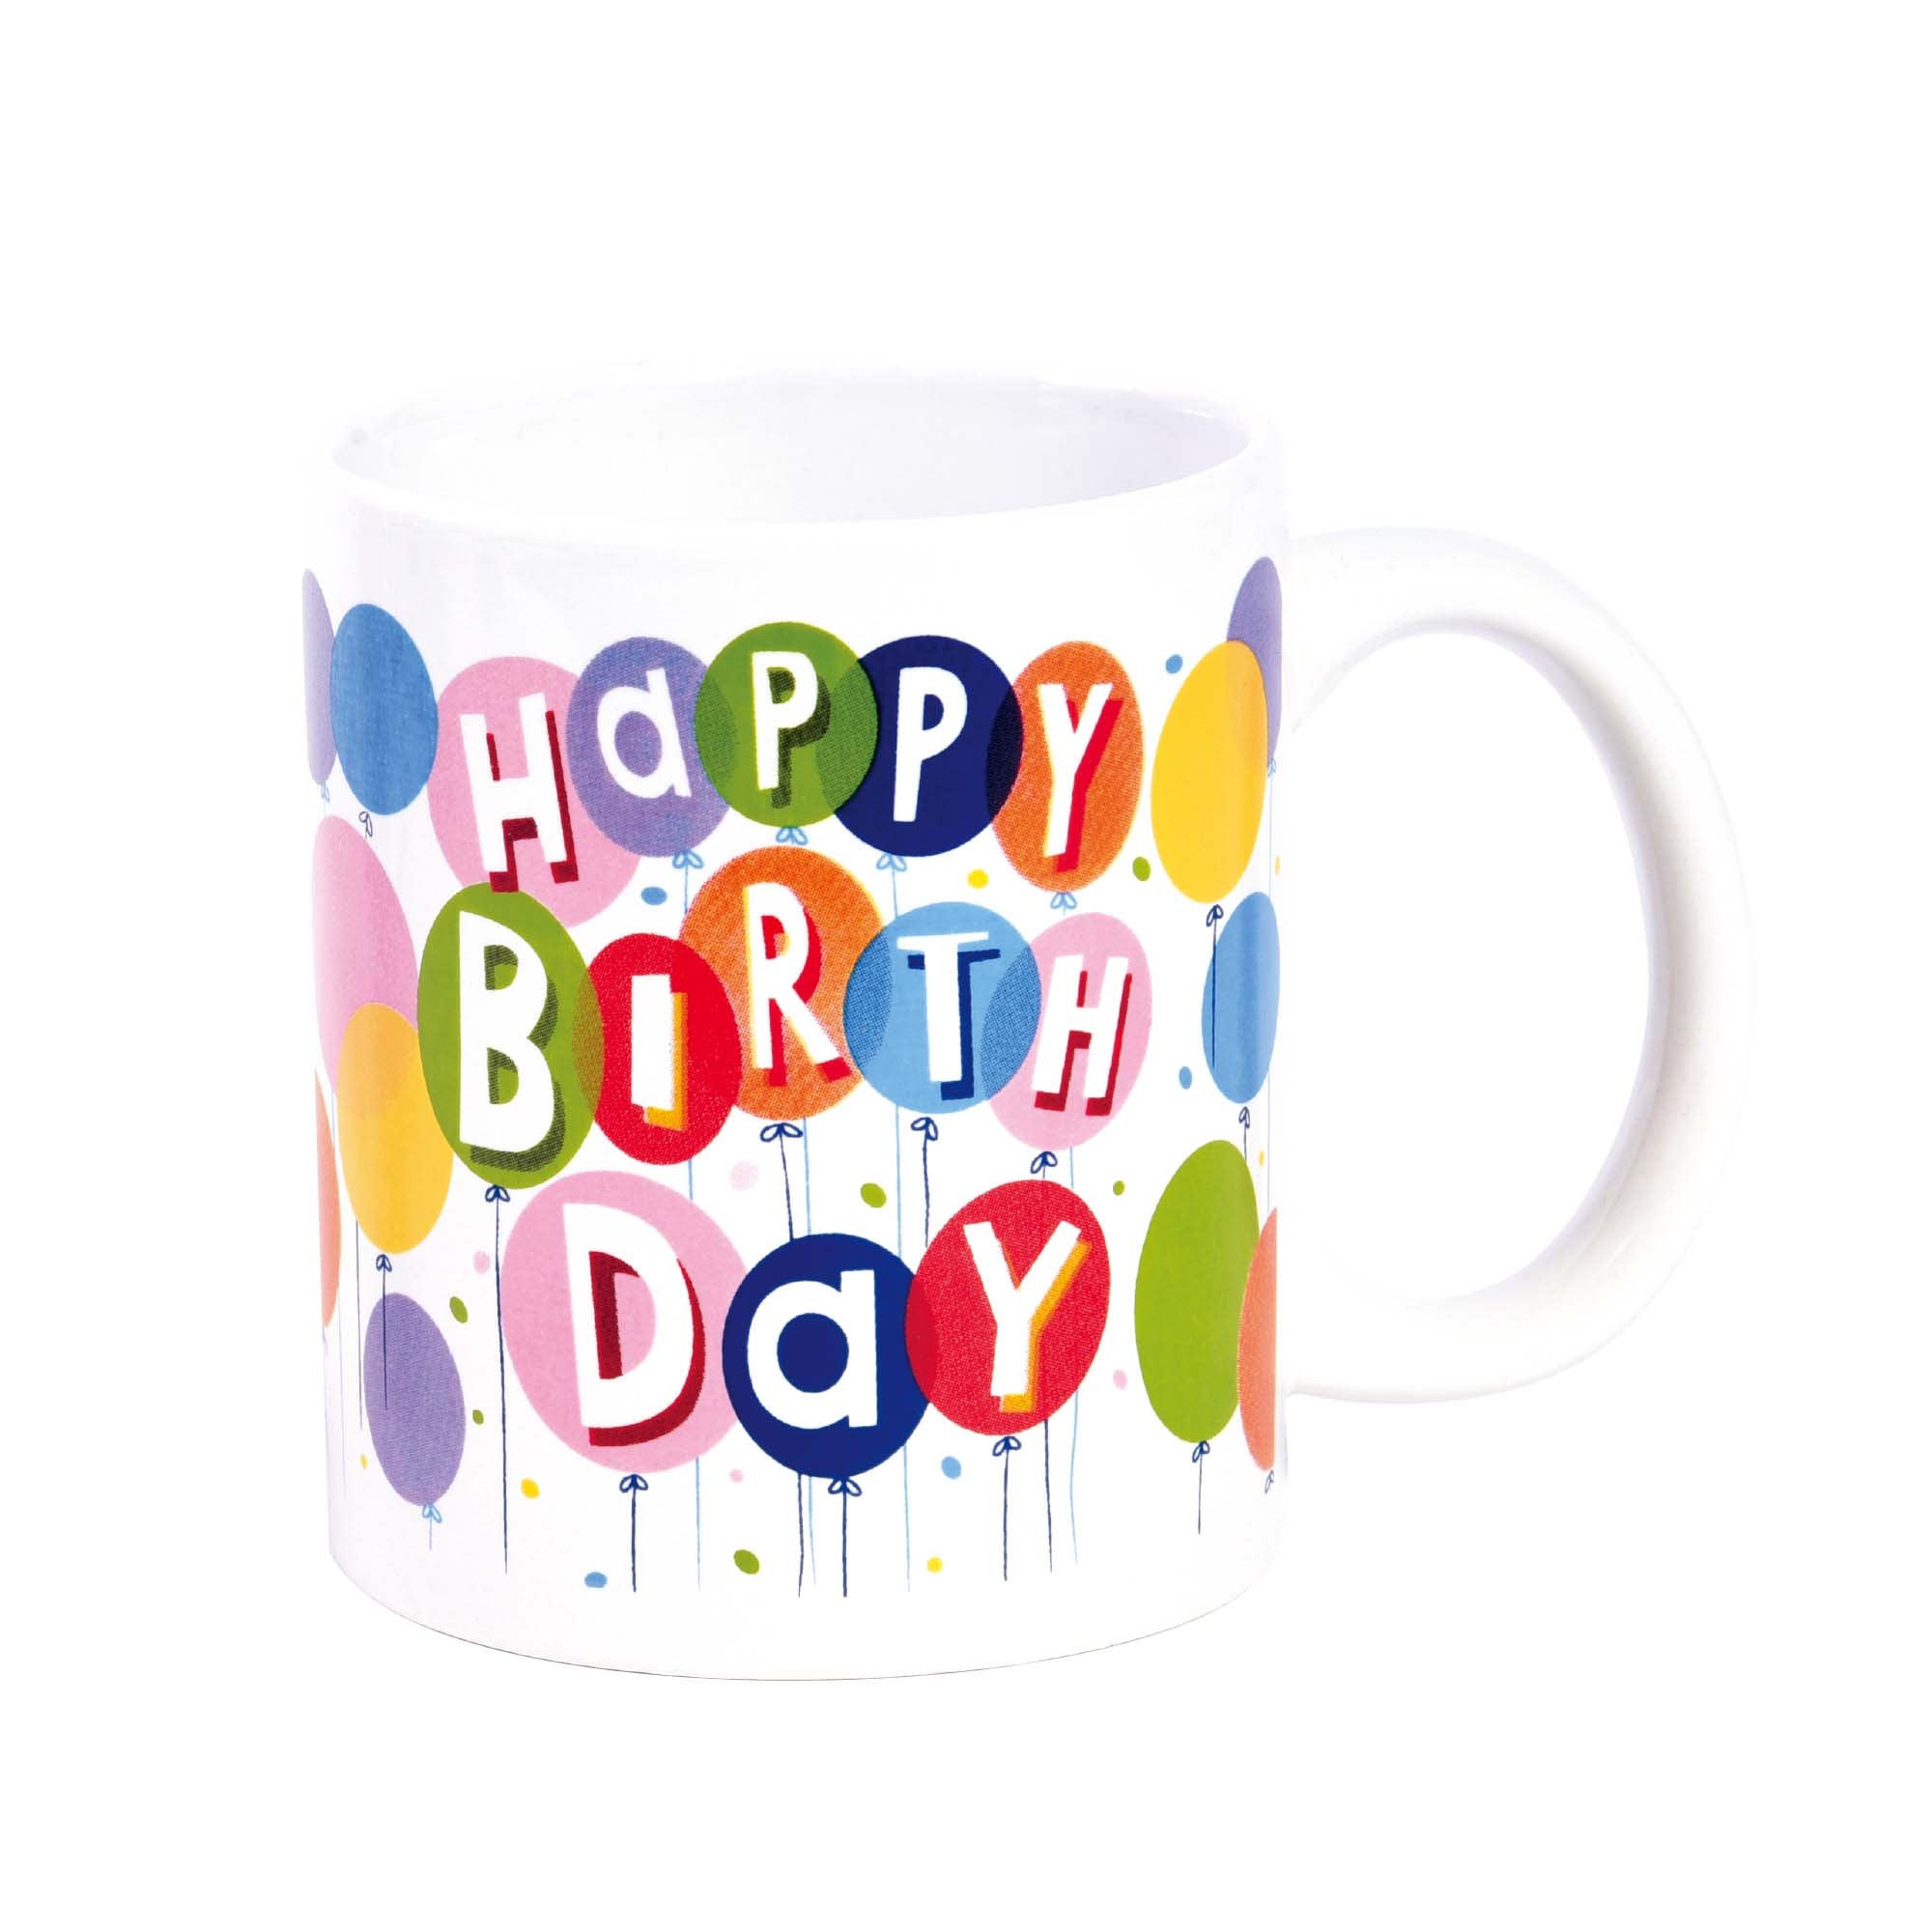 Best Wholesale Birthday Ideas and Supplies - for Kids, Teens, and Adults